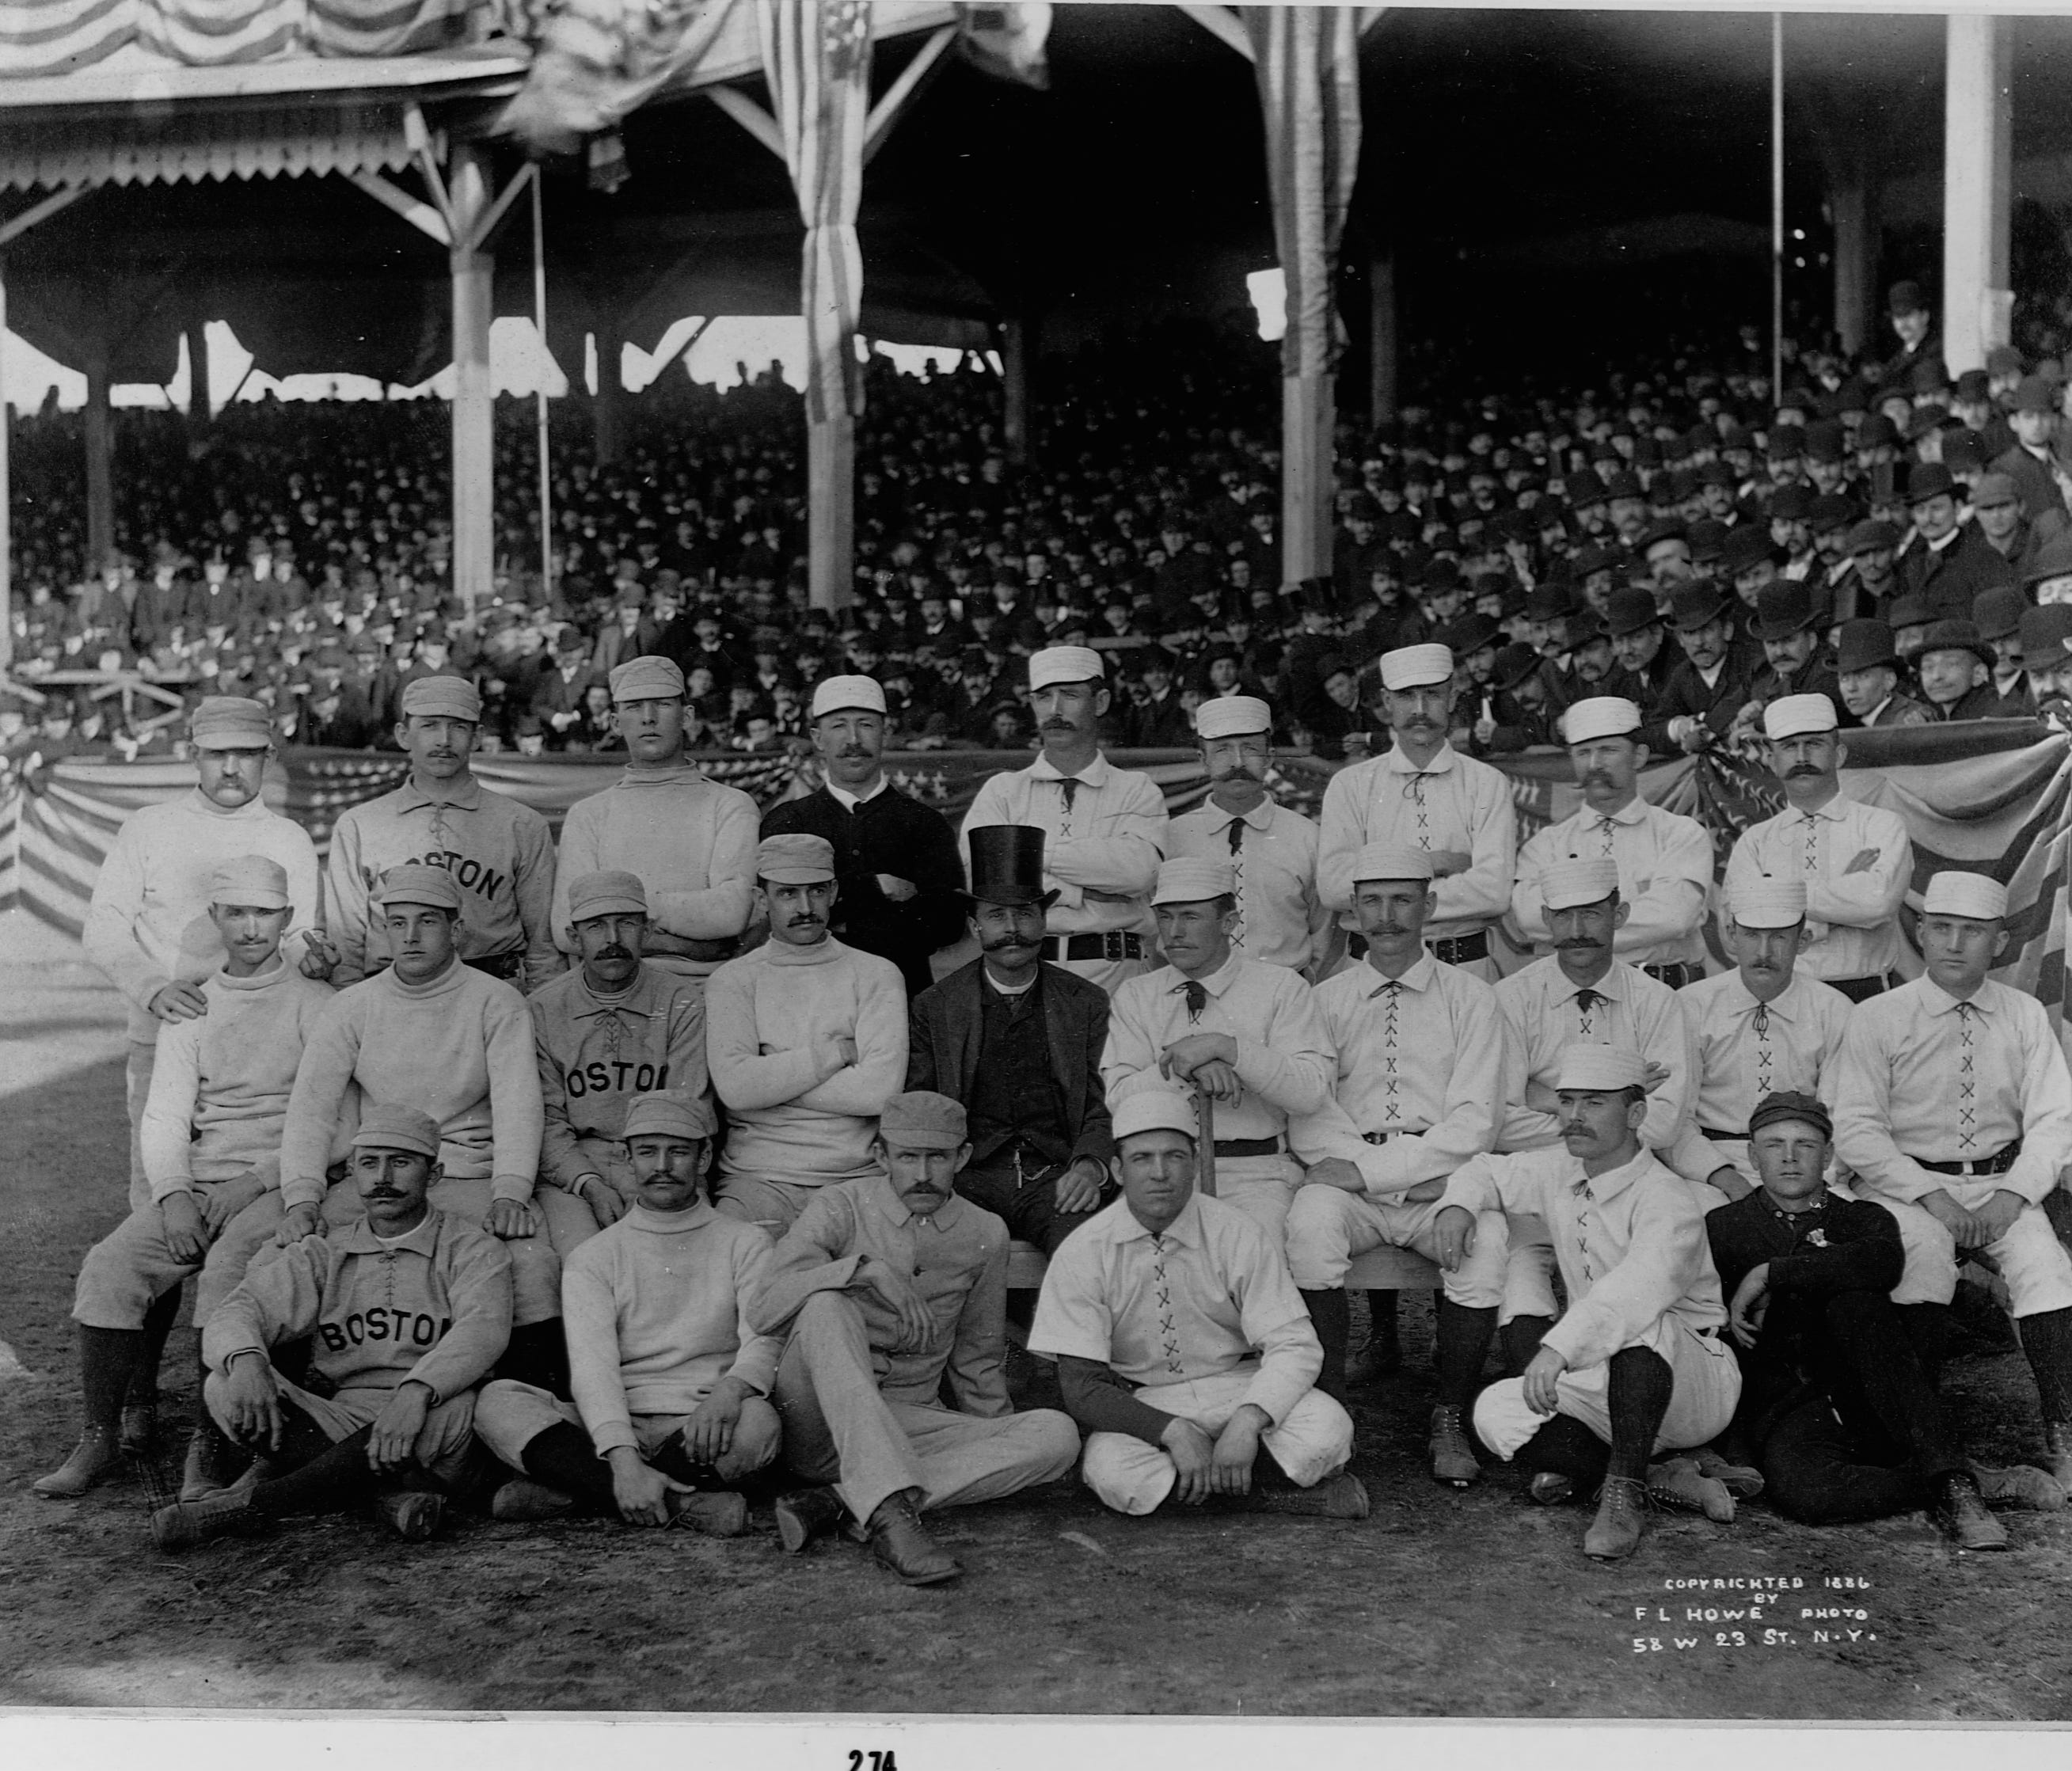 Old Hoss Radbourn, top left, flips the bird in a pre-game photo from 1886.